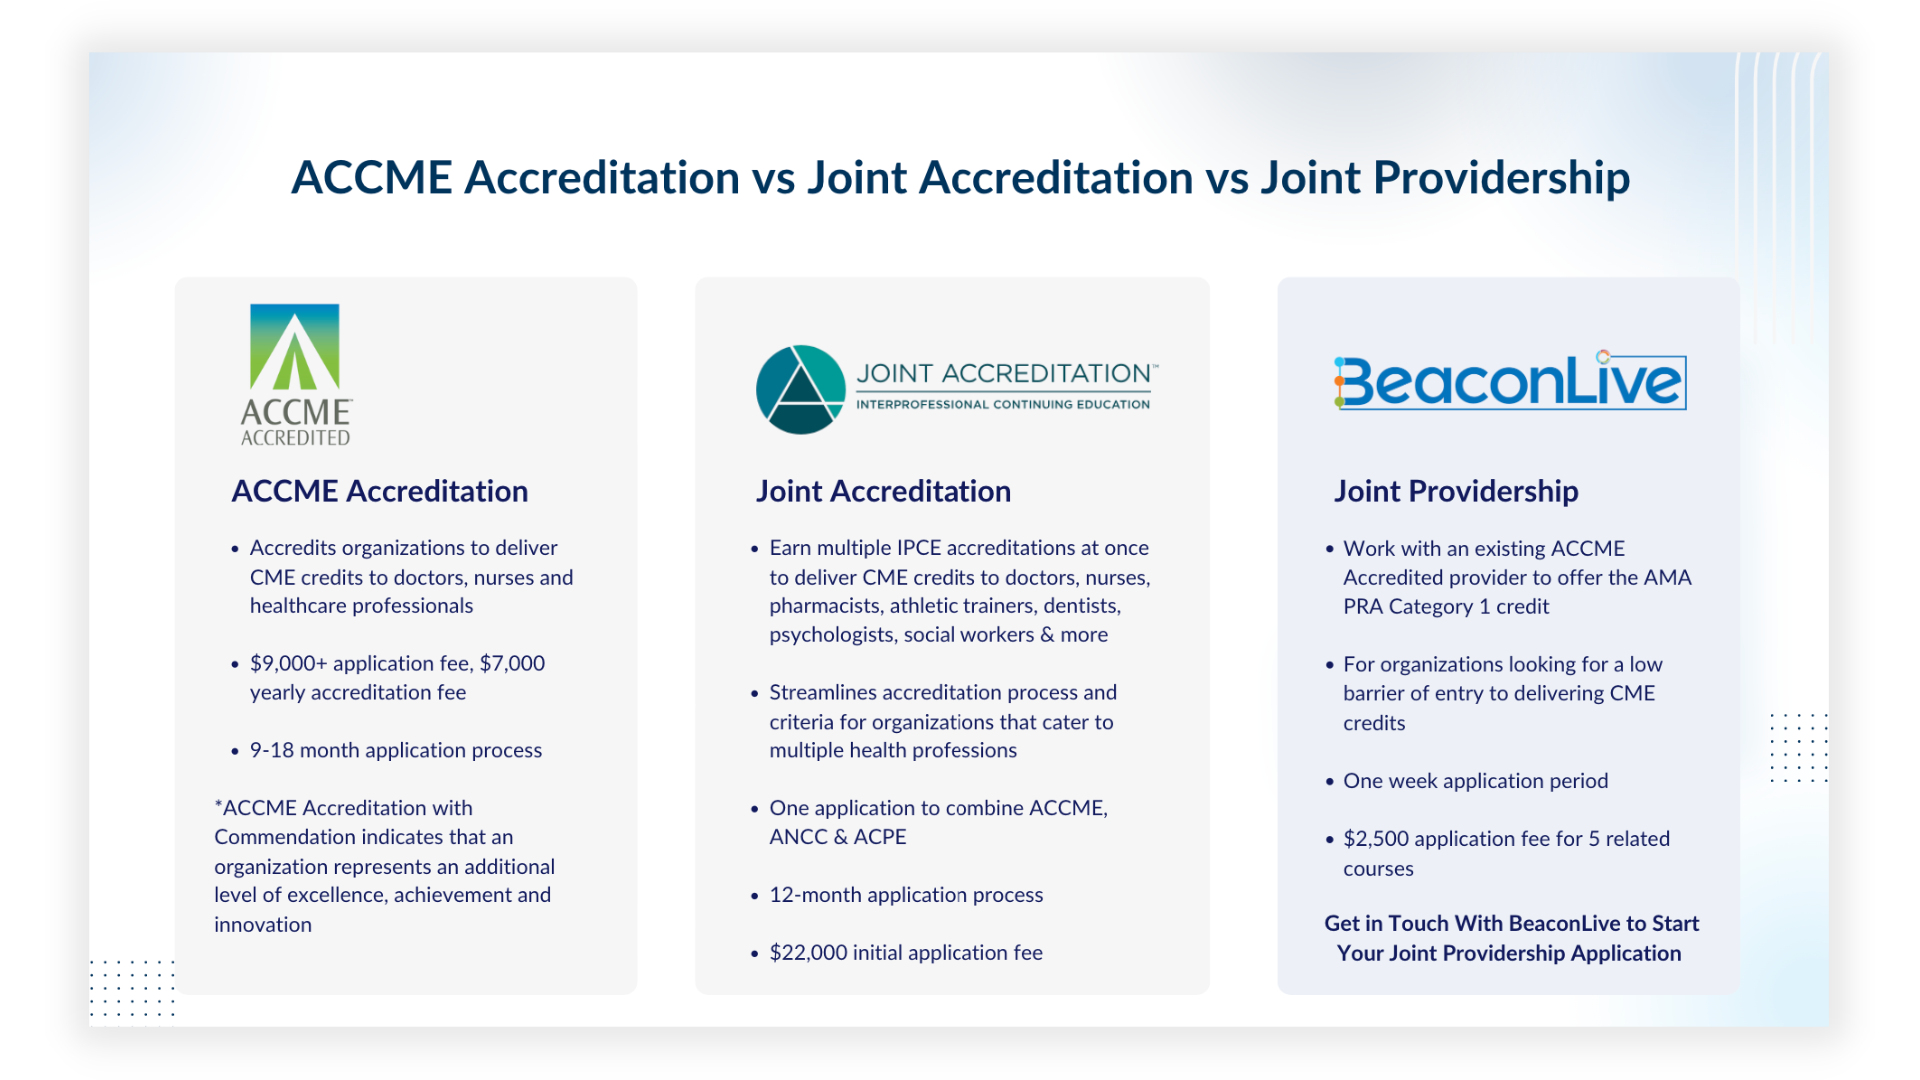 ACCME Accreditation vs Joint Accreditation vs Joint Providership Infographic